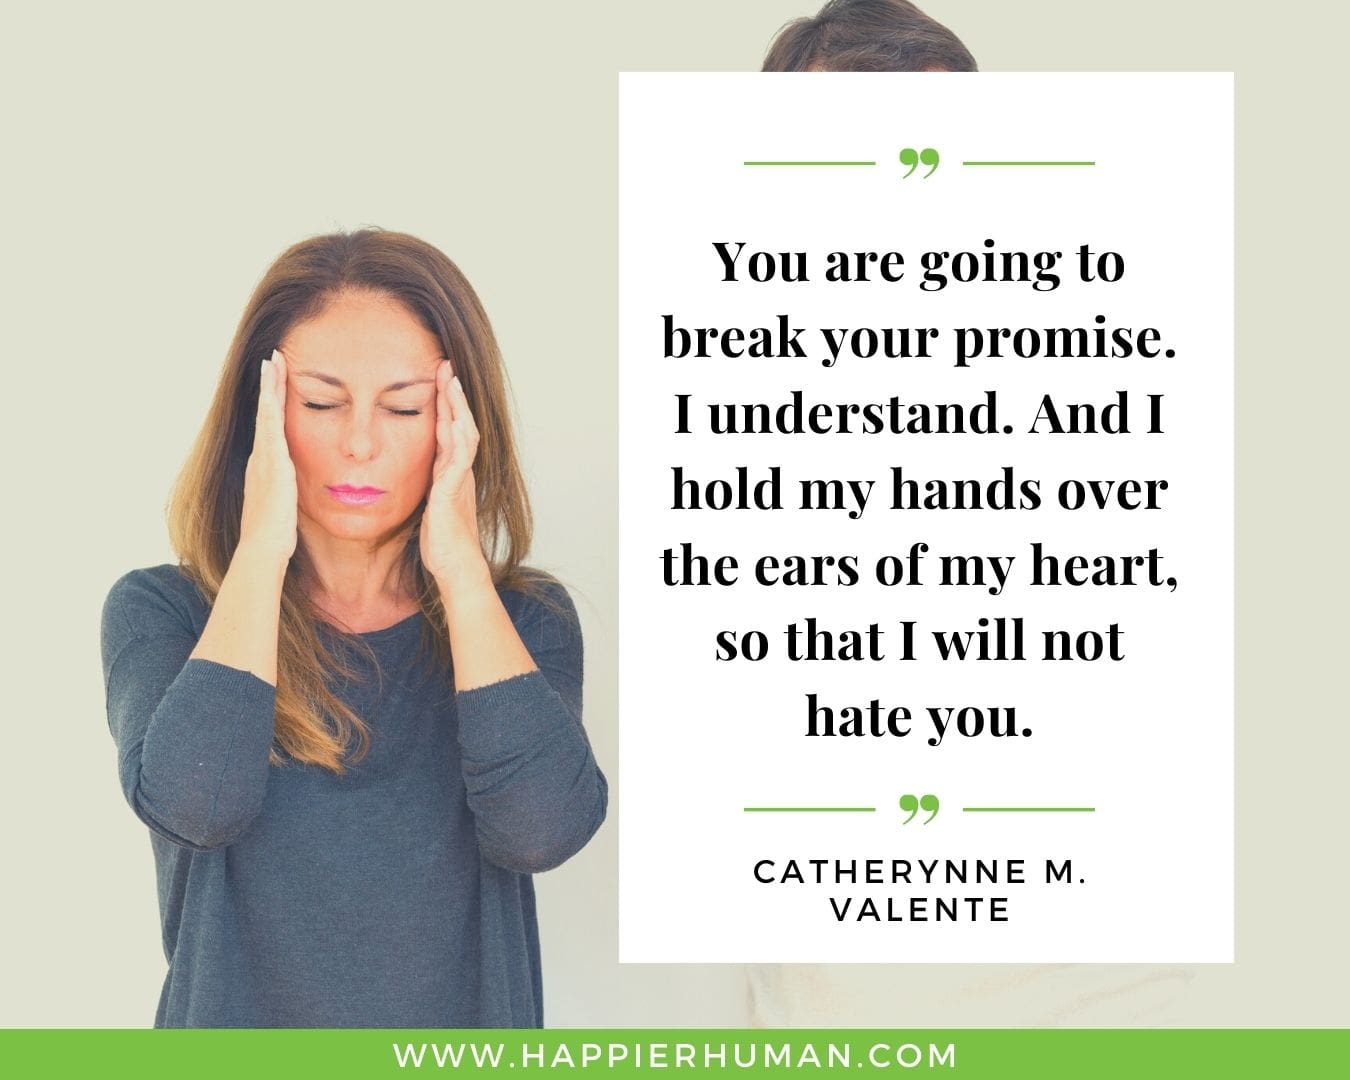 Broken Trust Quotes - “You are going to break your promise. I understand. And I hold my hands over the ears of my heart, so that I will not hate you.” - Catherynne M. Valente